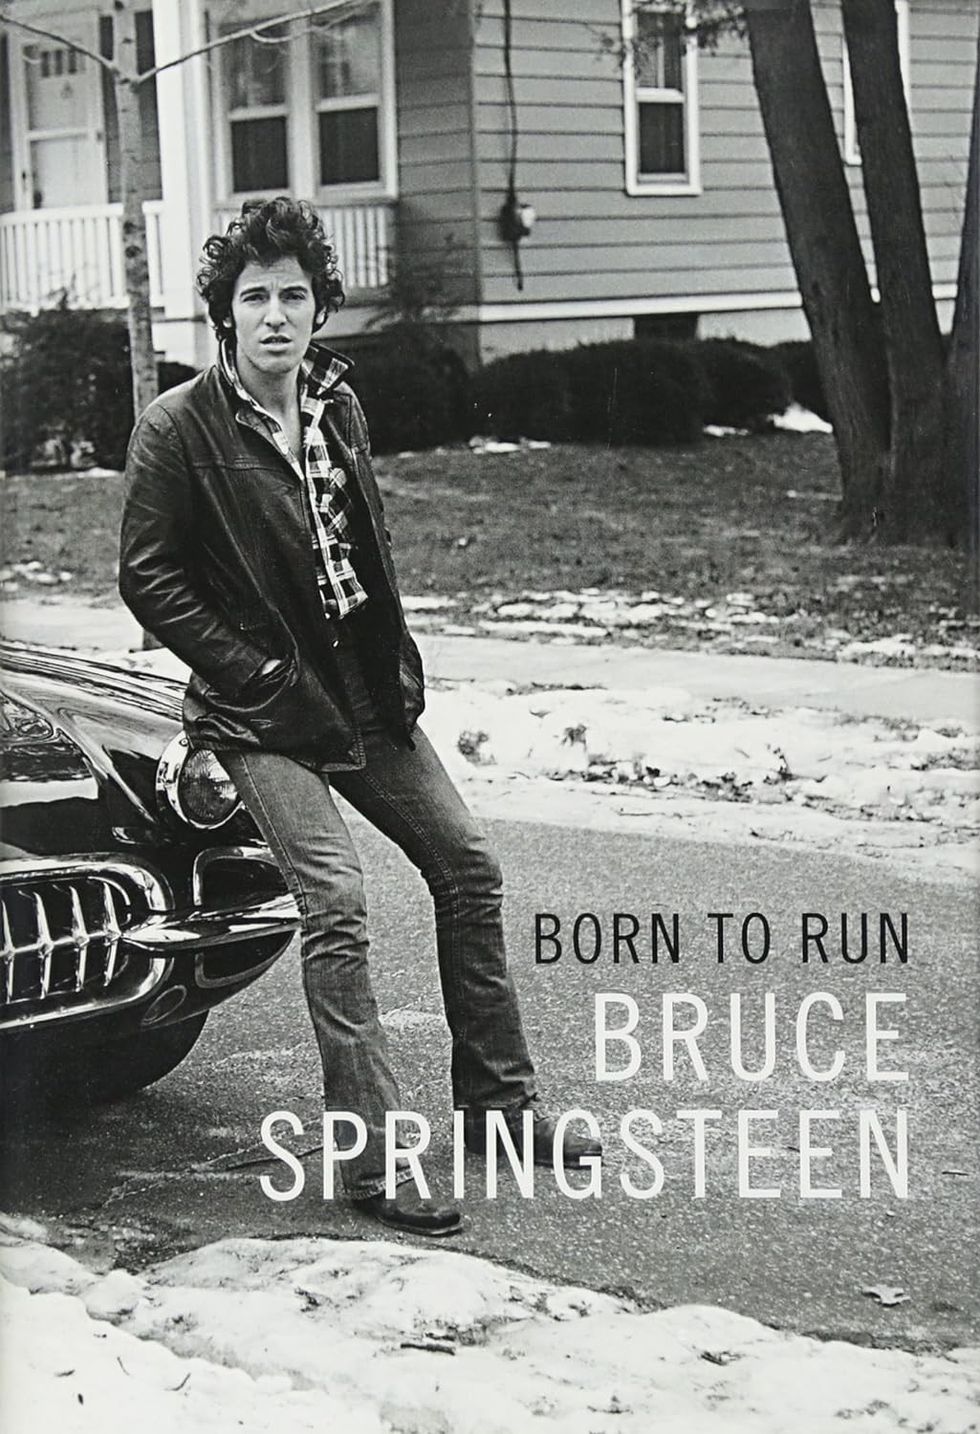 "Born to Run" by Bruce Springsteen